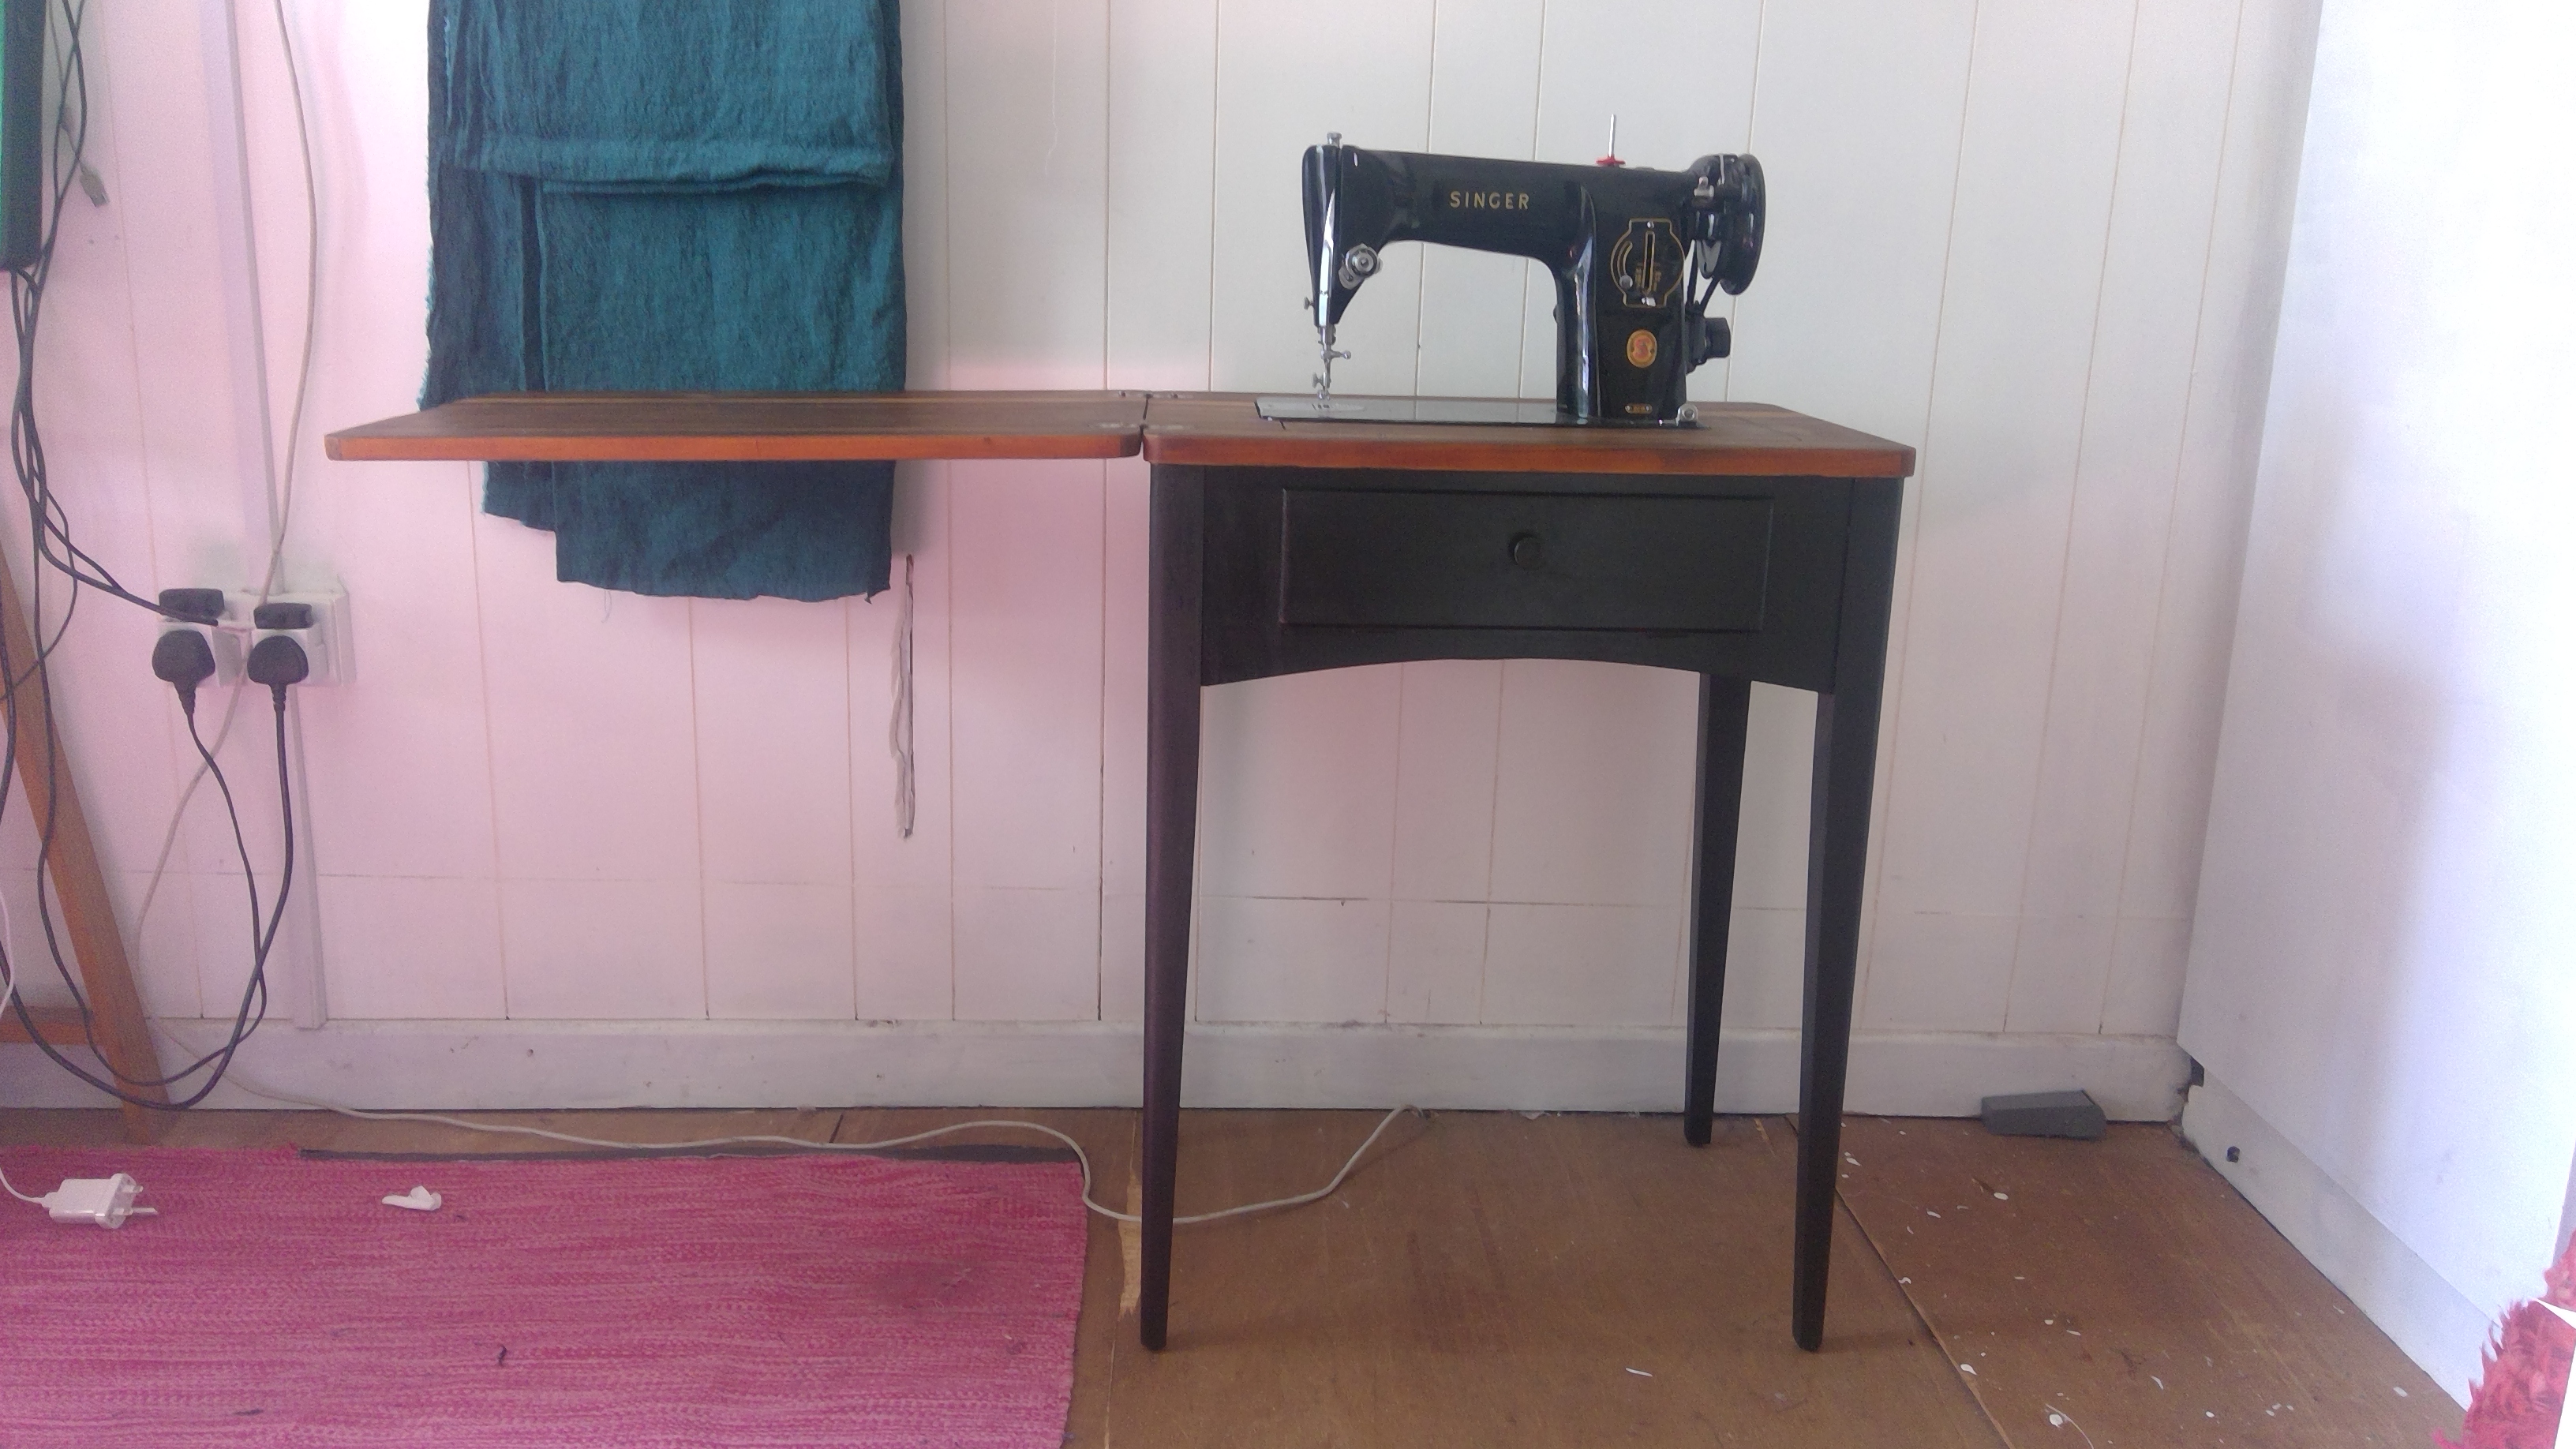 Singer table – before and after